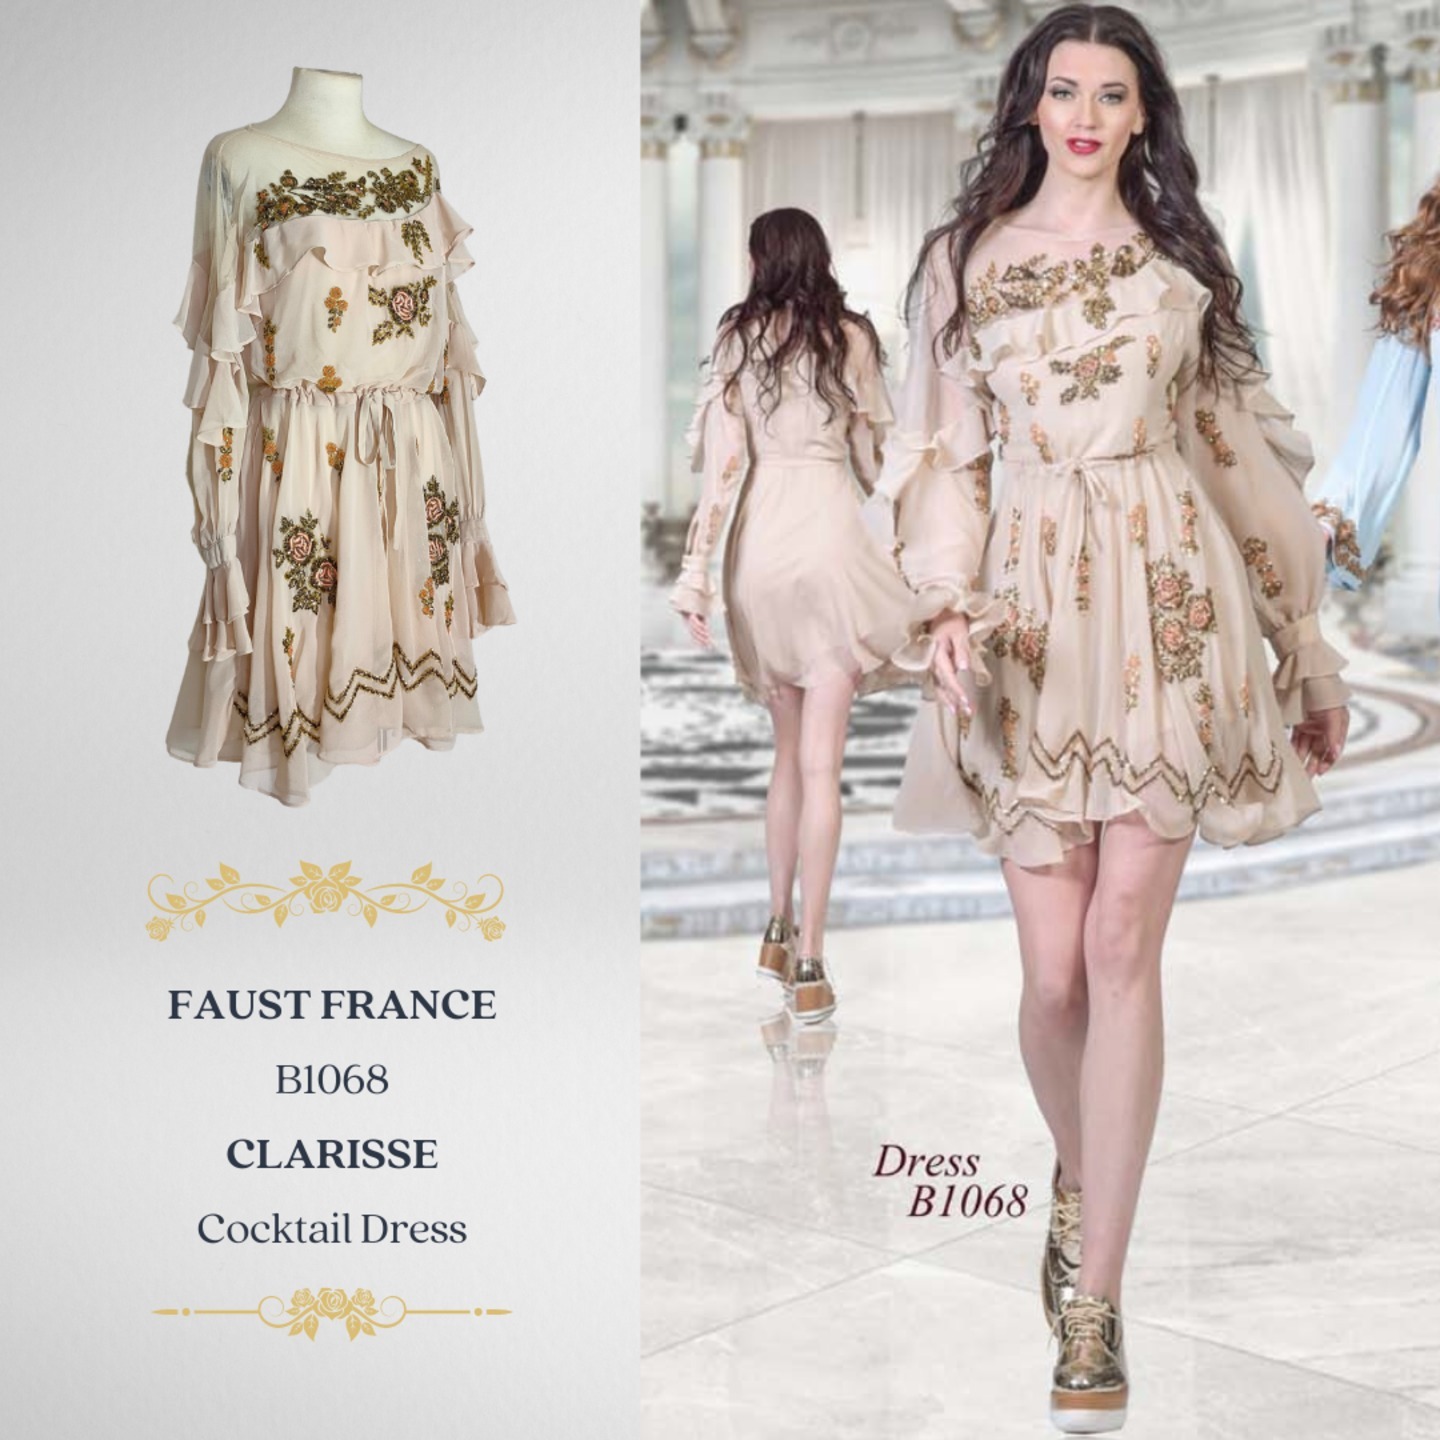 FAUST FRANCE B1068 CLARISSE ROSE EMBROIDERY AND SEQUINS SHORT COCKTAIL DRESS